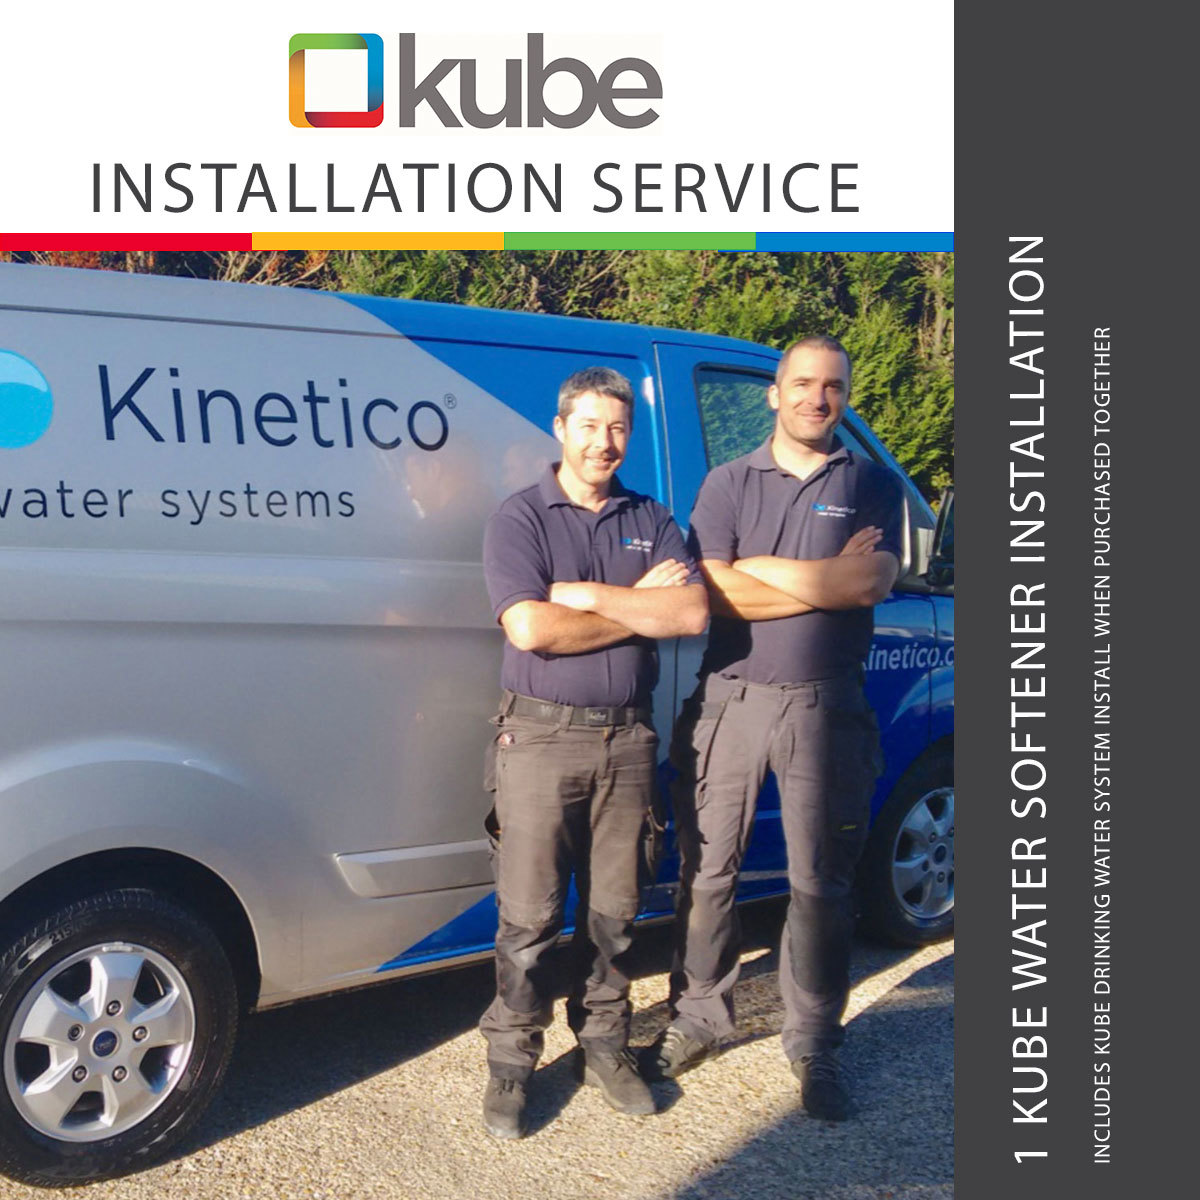 Image of two plumbers standing by Kinetico Van smiling and installation banner